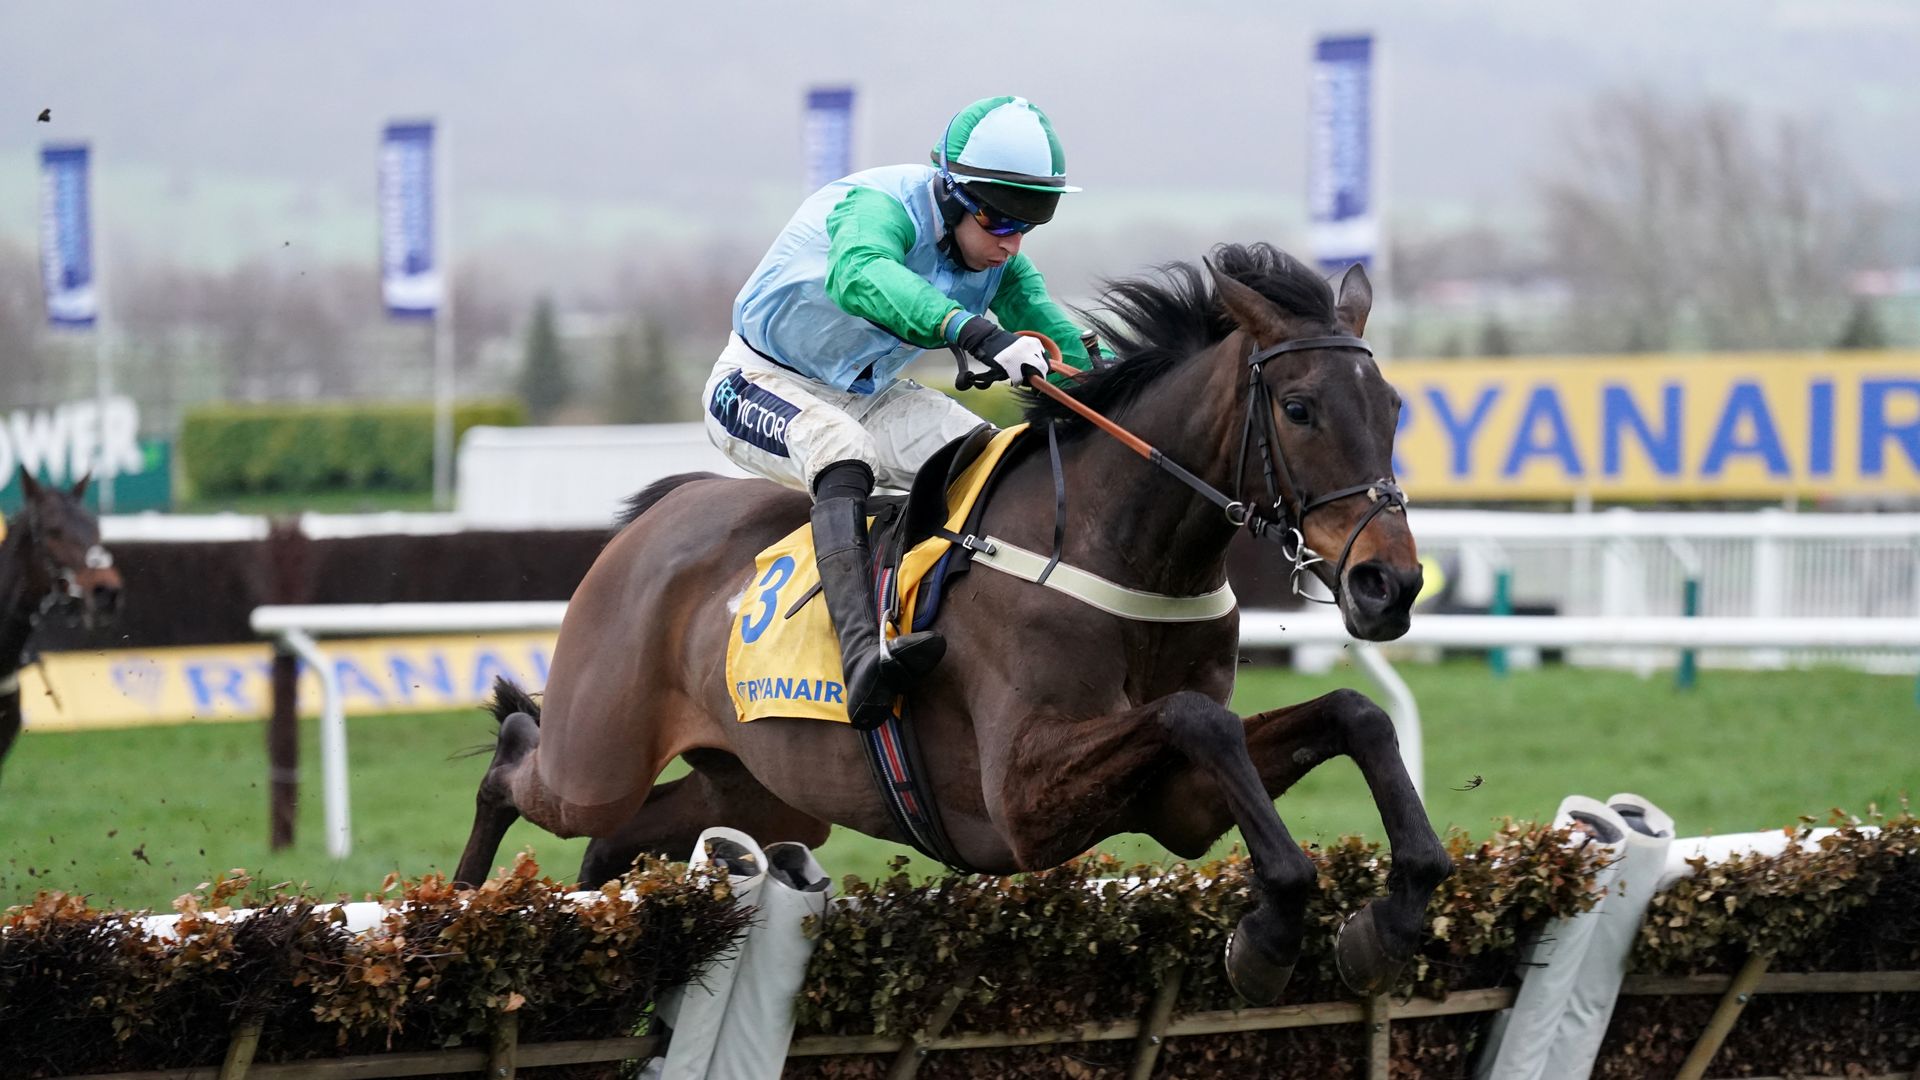 You Wear It Well dominates Mares' Novices' Hurdle from the front